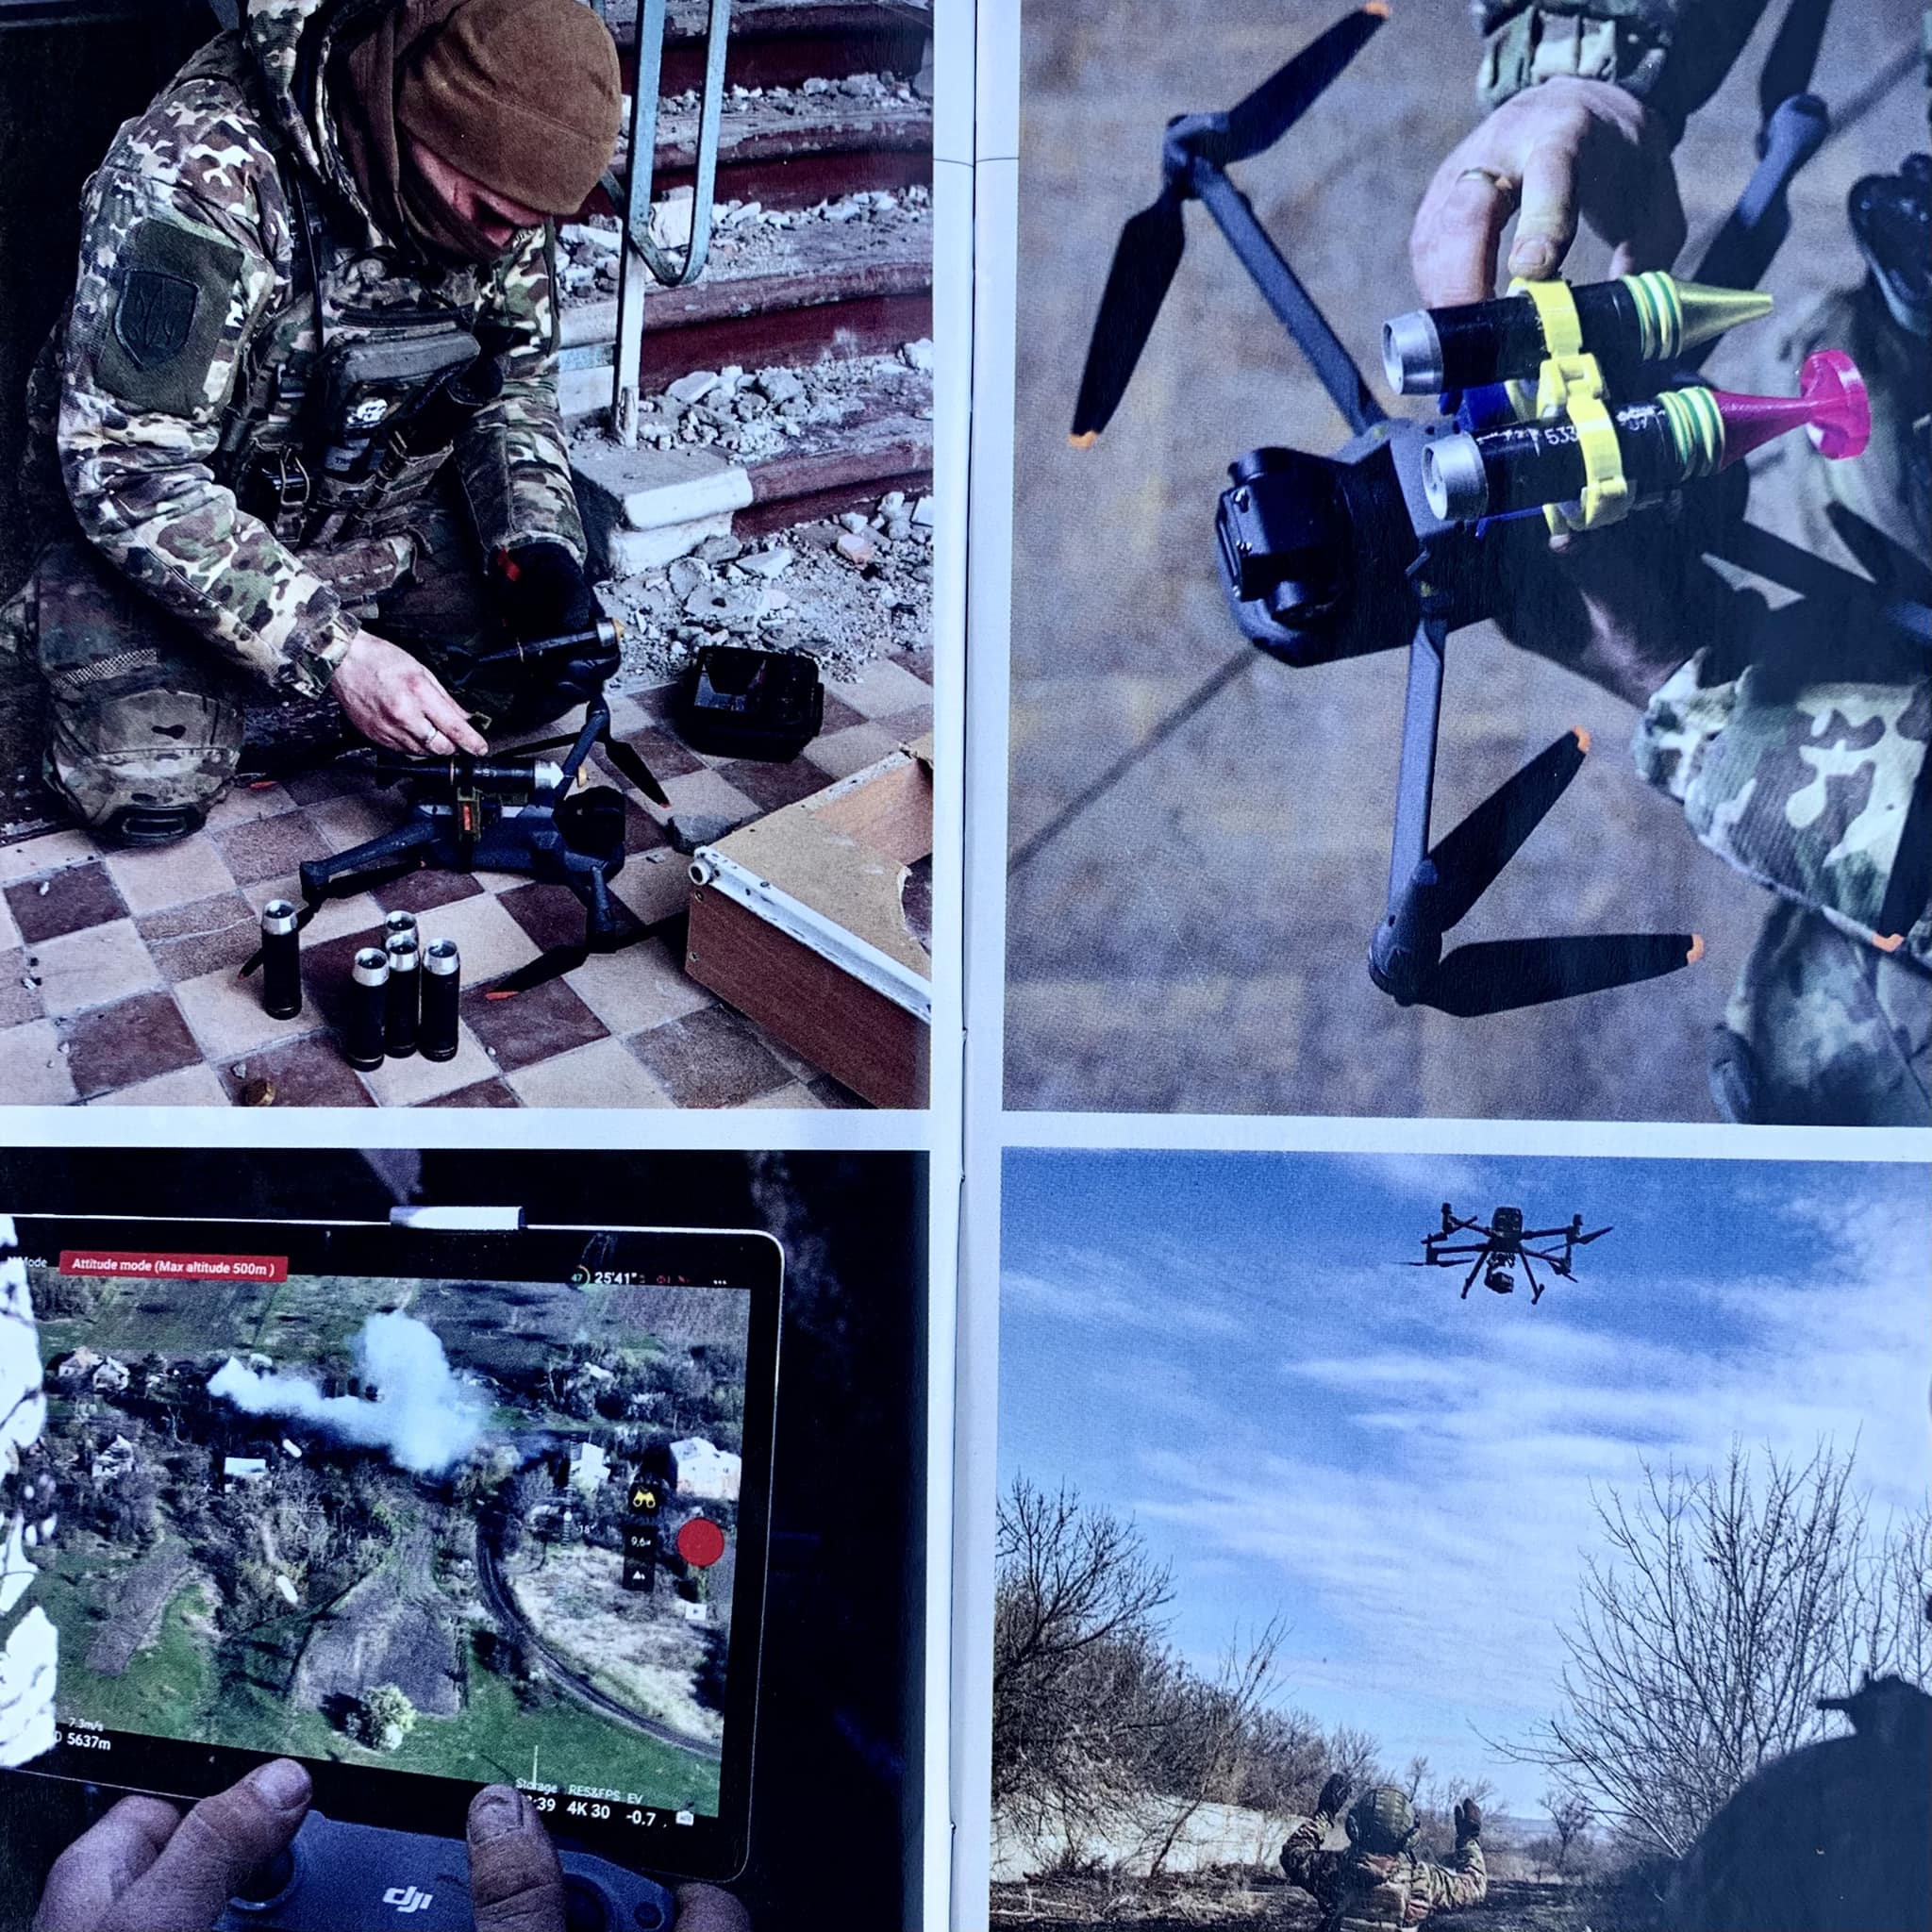 Uses of drones in offensive & defensive warfare